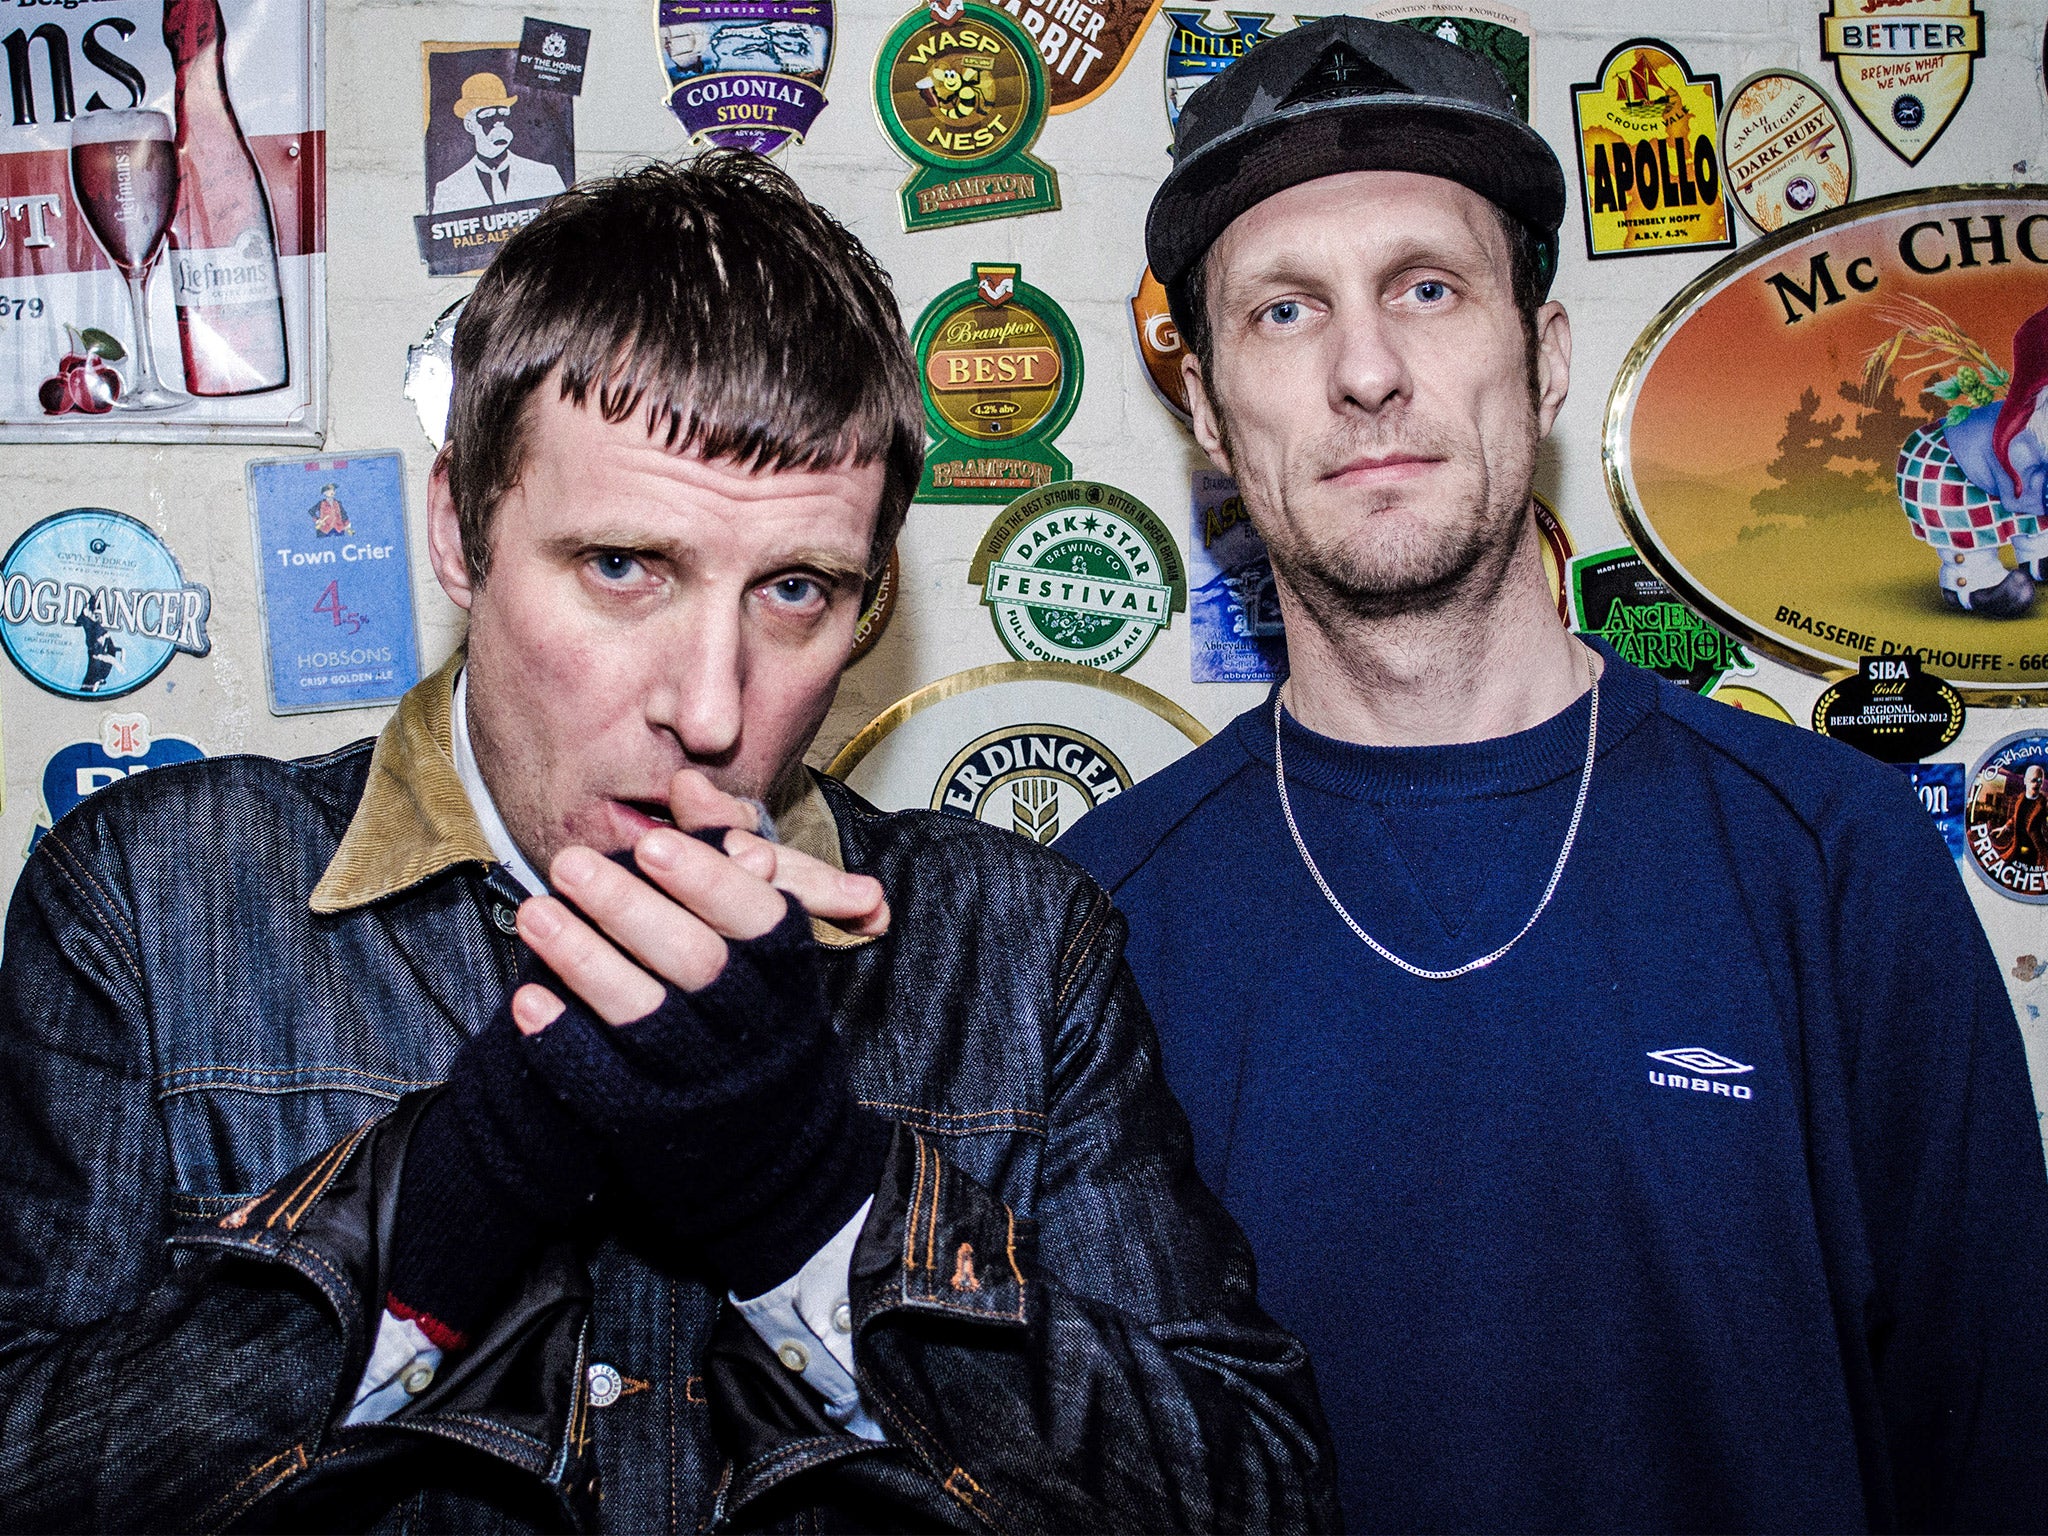 Jason Williamson, left, and Andrew Fearn of Sleaford Mods